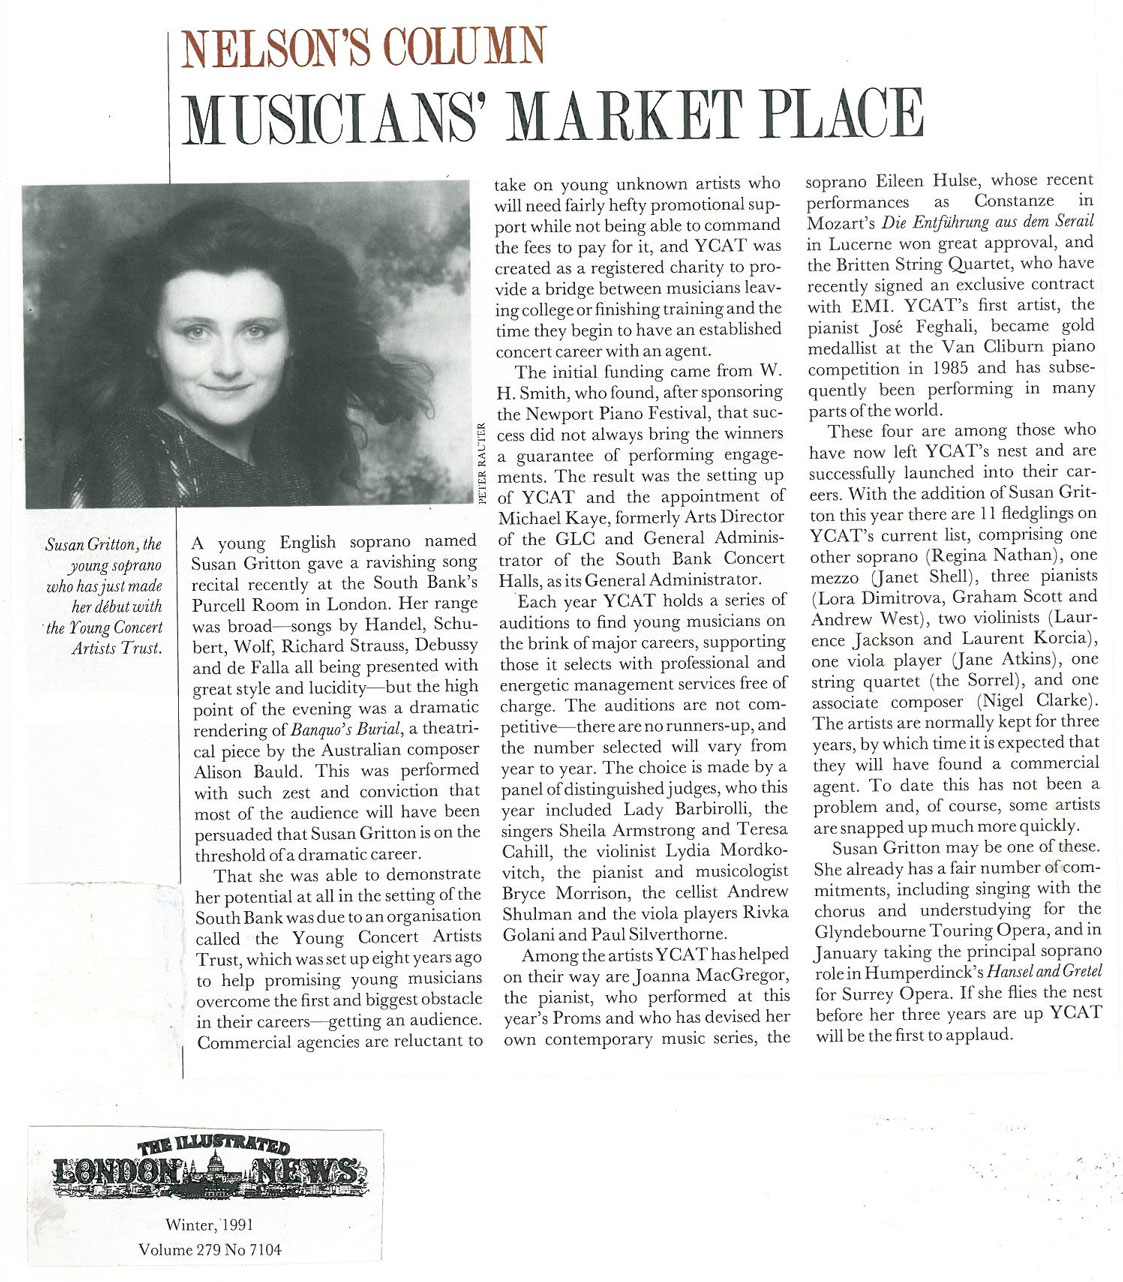 Article, 1991, Illustrated London News